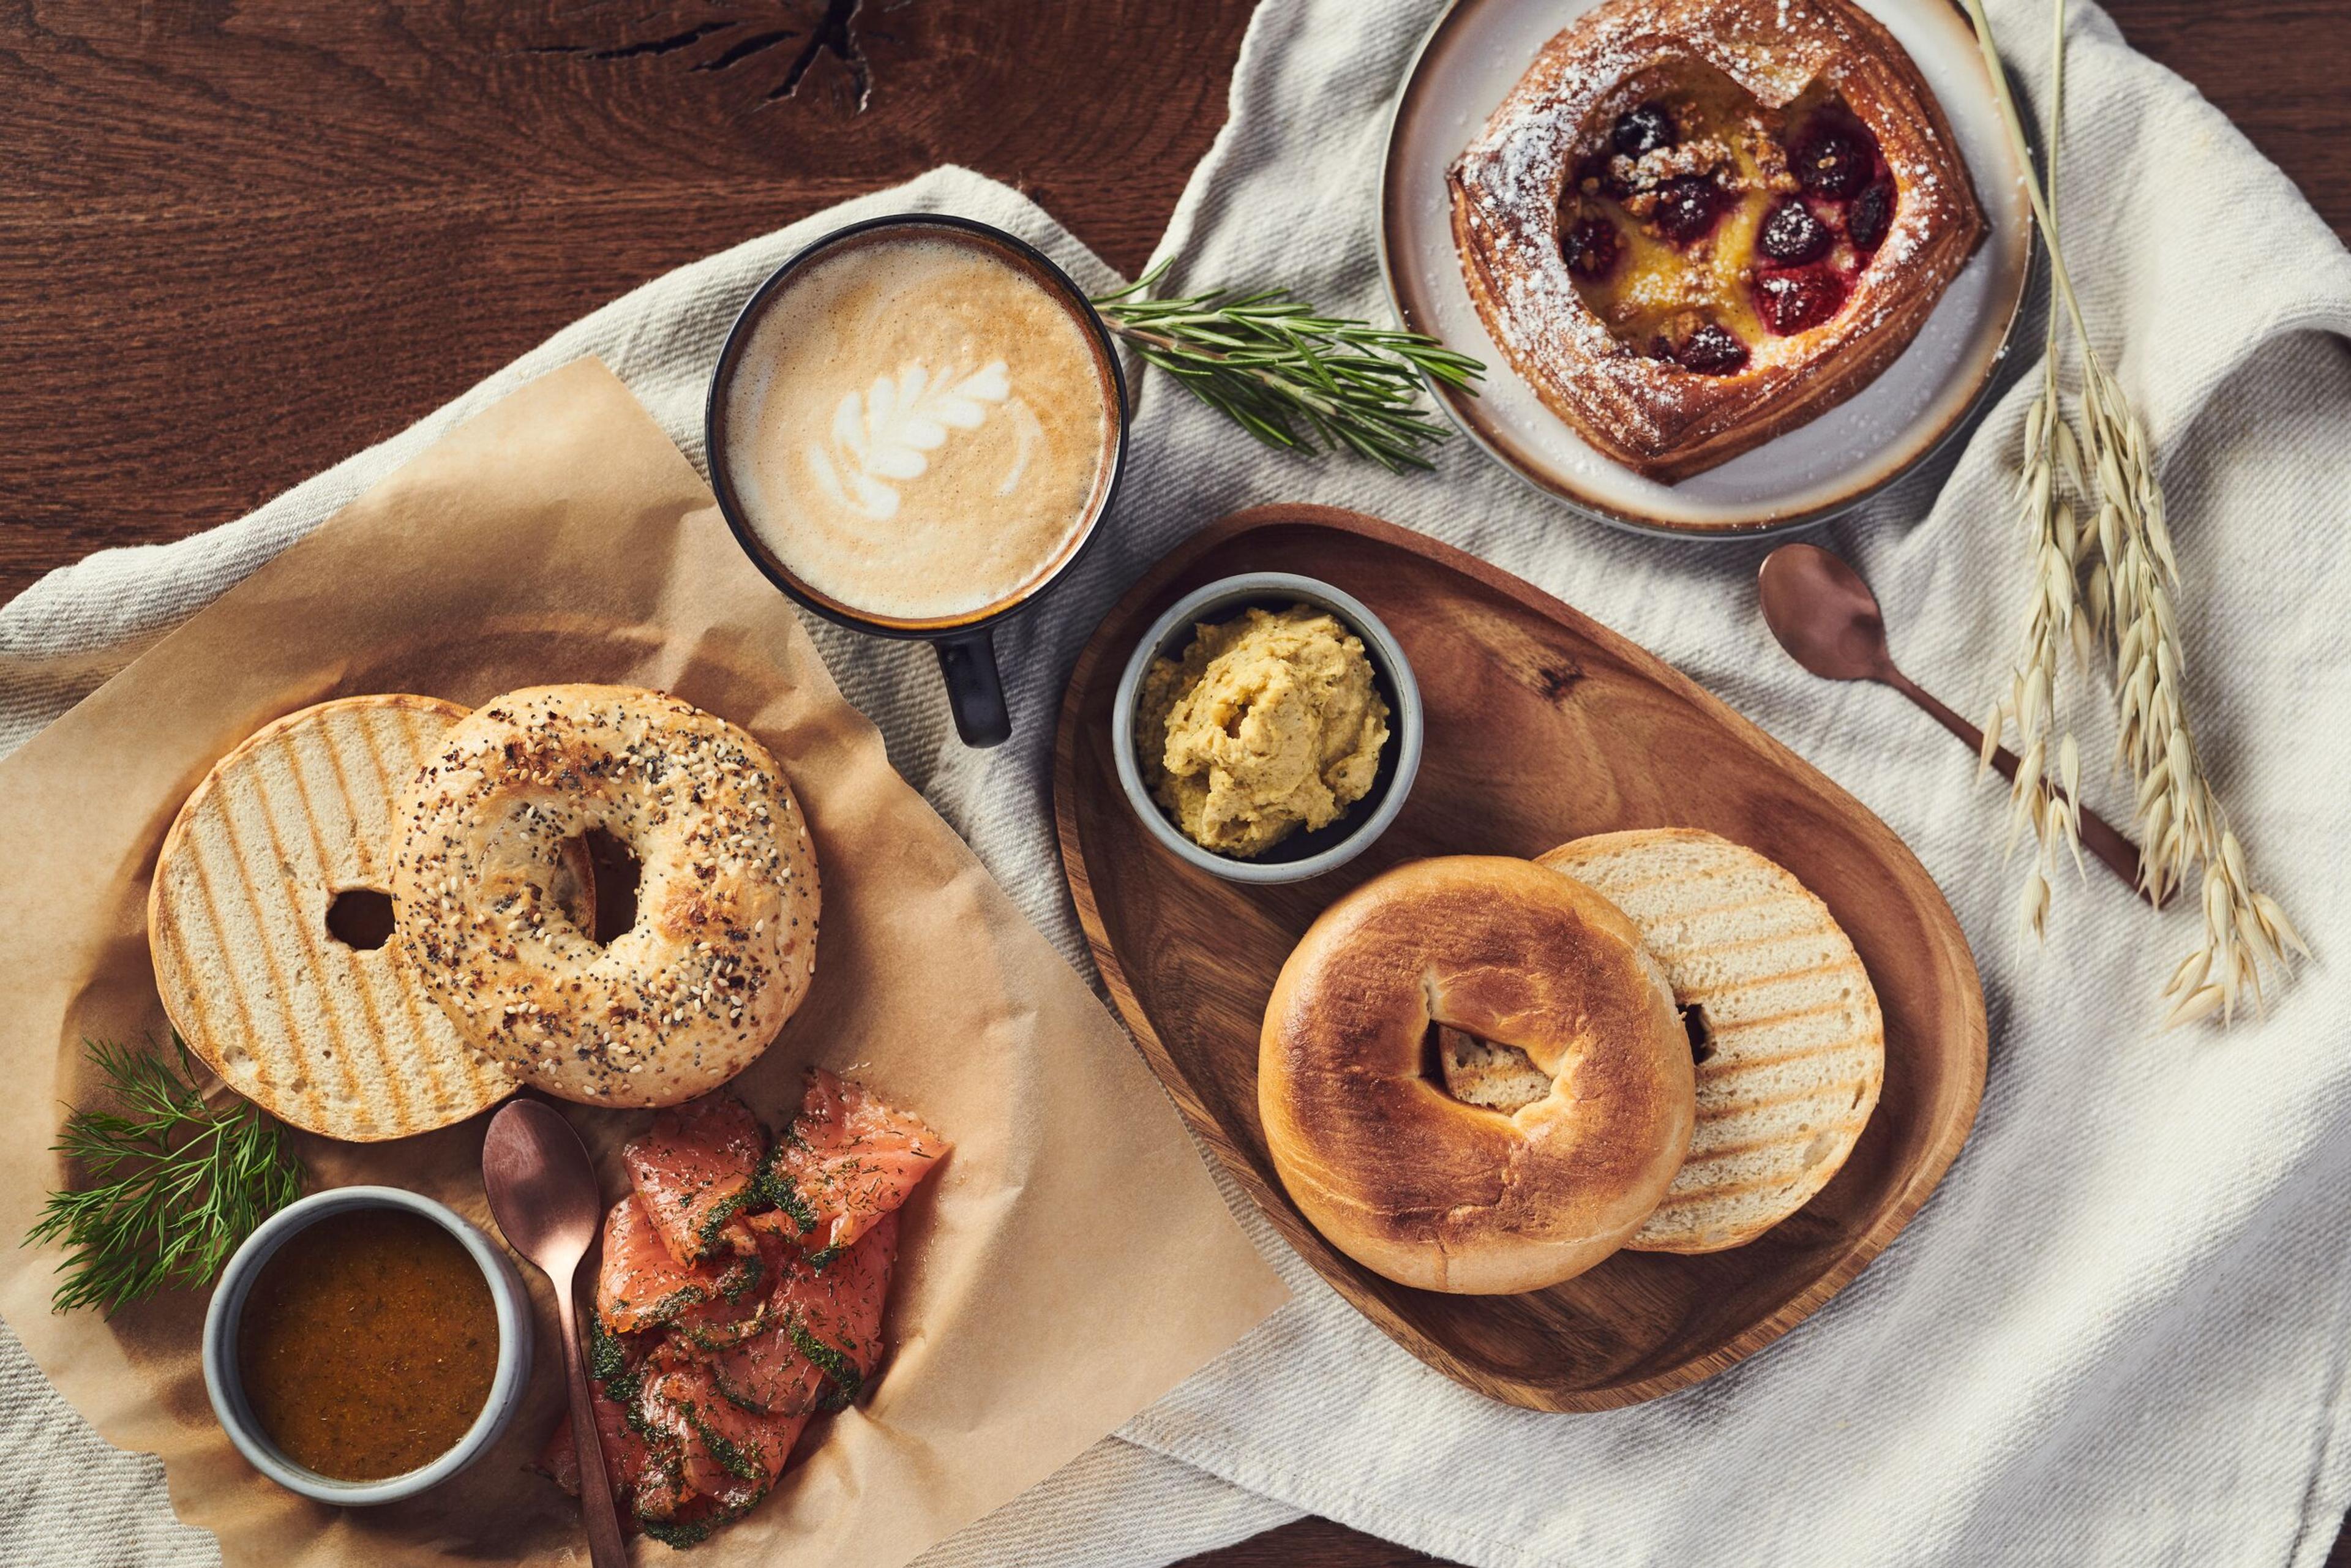 A cozy and appetizing spread of Nordic cuisine, featuring grilled bread, a bagel, smoked salmon, a bowl of soup, spreads, and a sweet pastry, paired with a latte, presented on wooden boards and a rustic table, evoking a culinary experience at Sky Lagoon Iceland.